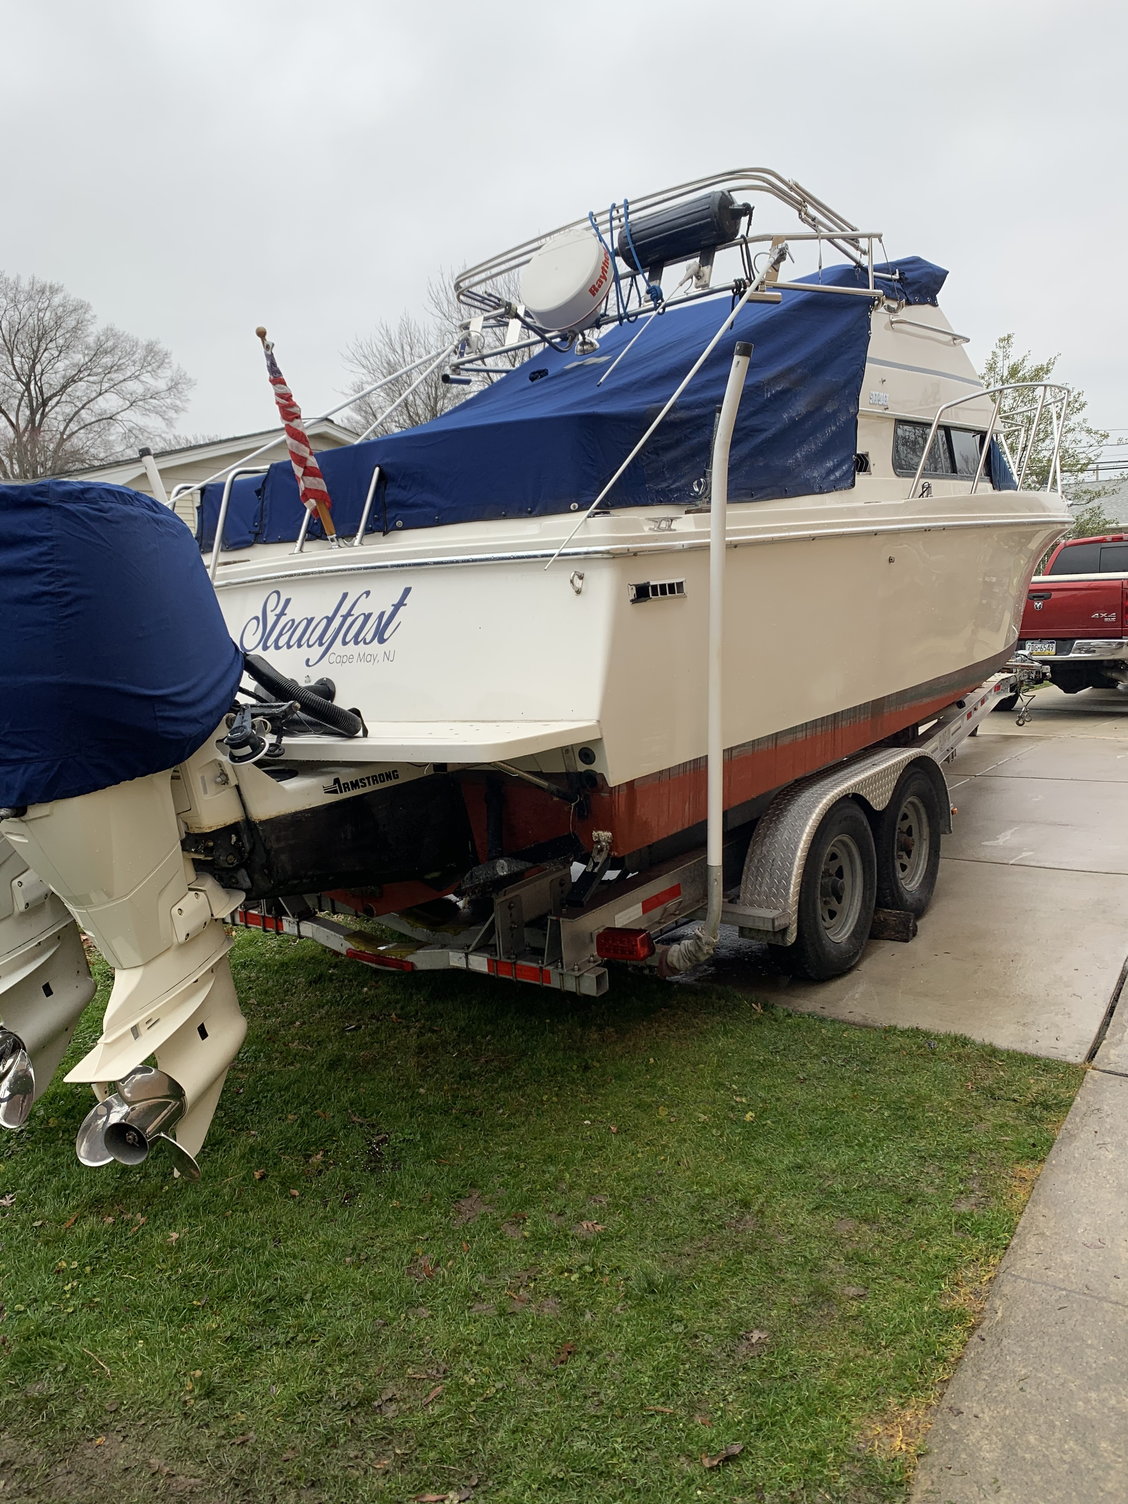 Small/Compact Sportfishing Flybridge Boats - Page 2 - The Hull Truth -  Boating and Fishing Forum